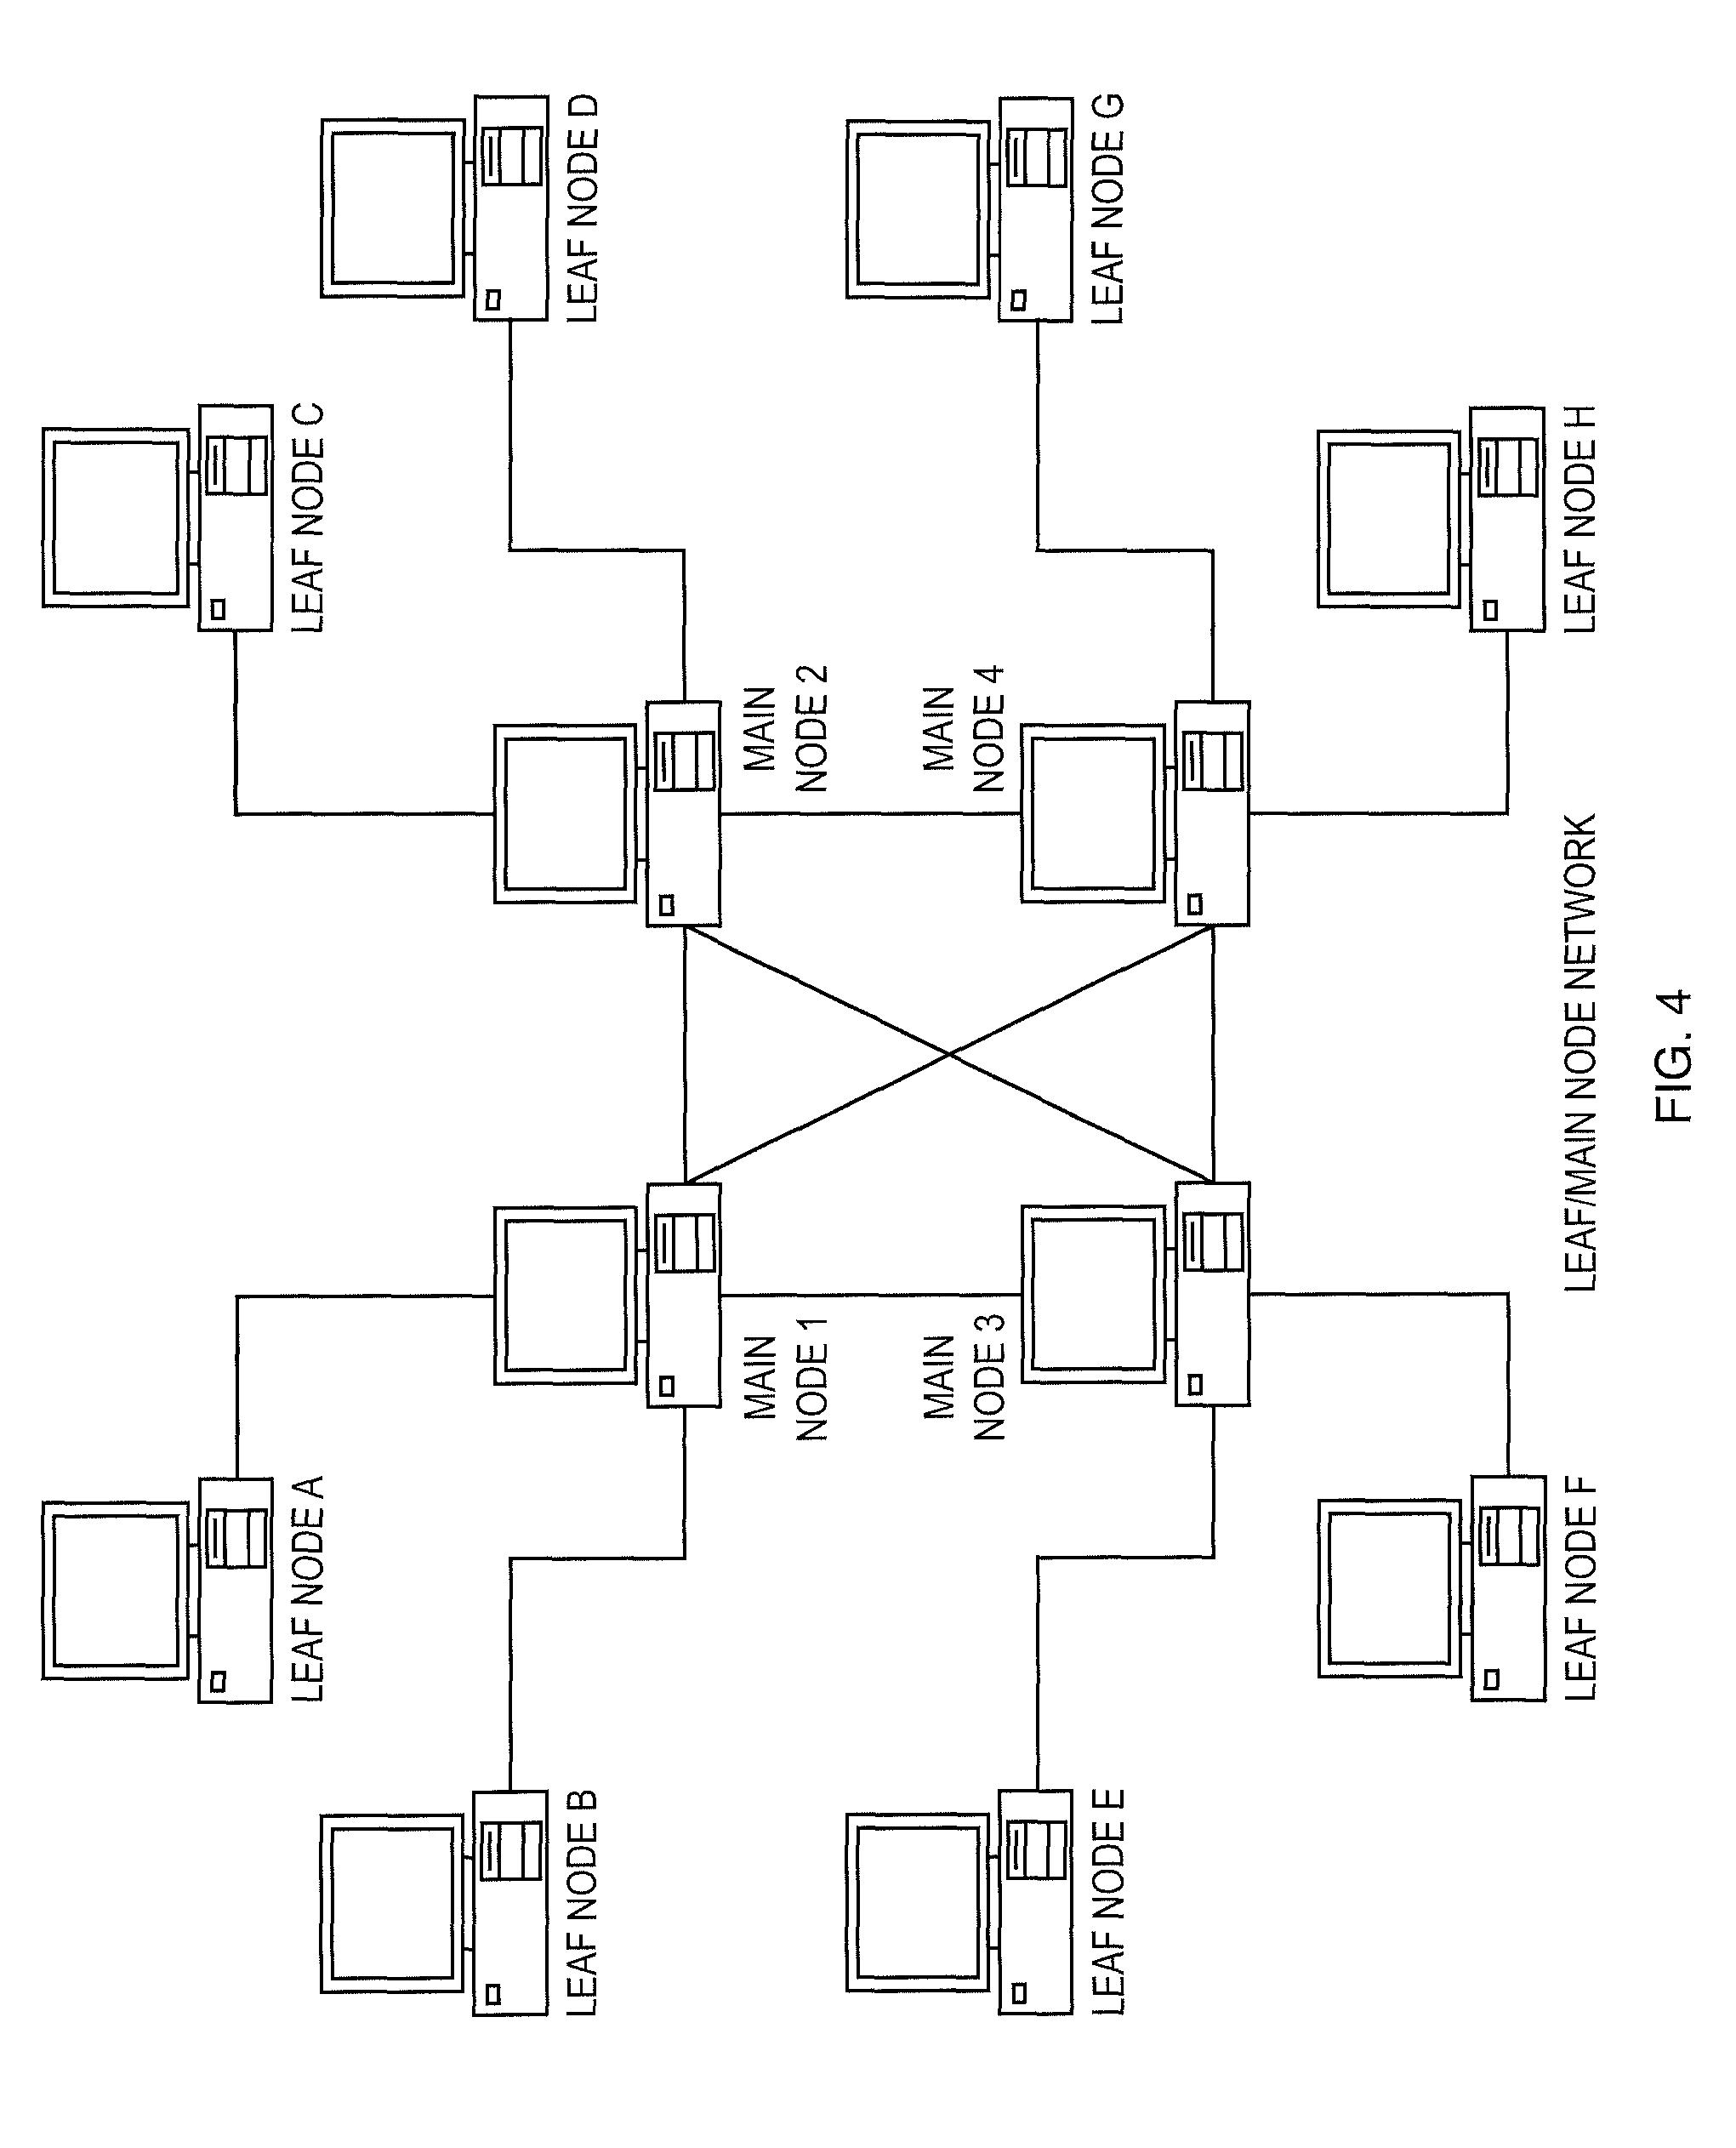 System and method for searching for specific types of people or information on a peer-to-peer network